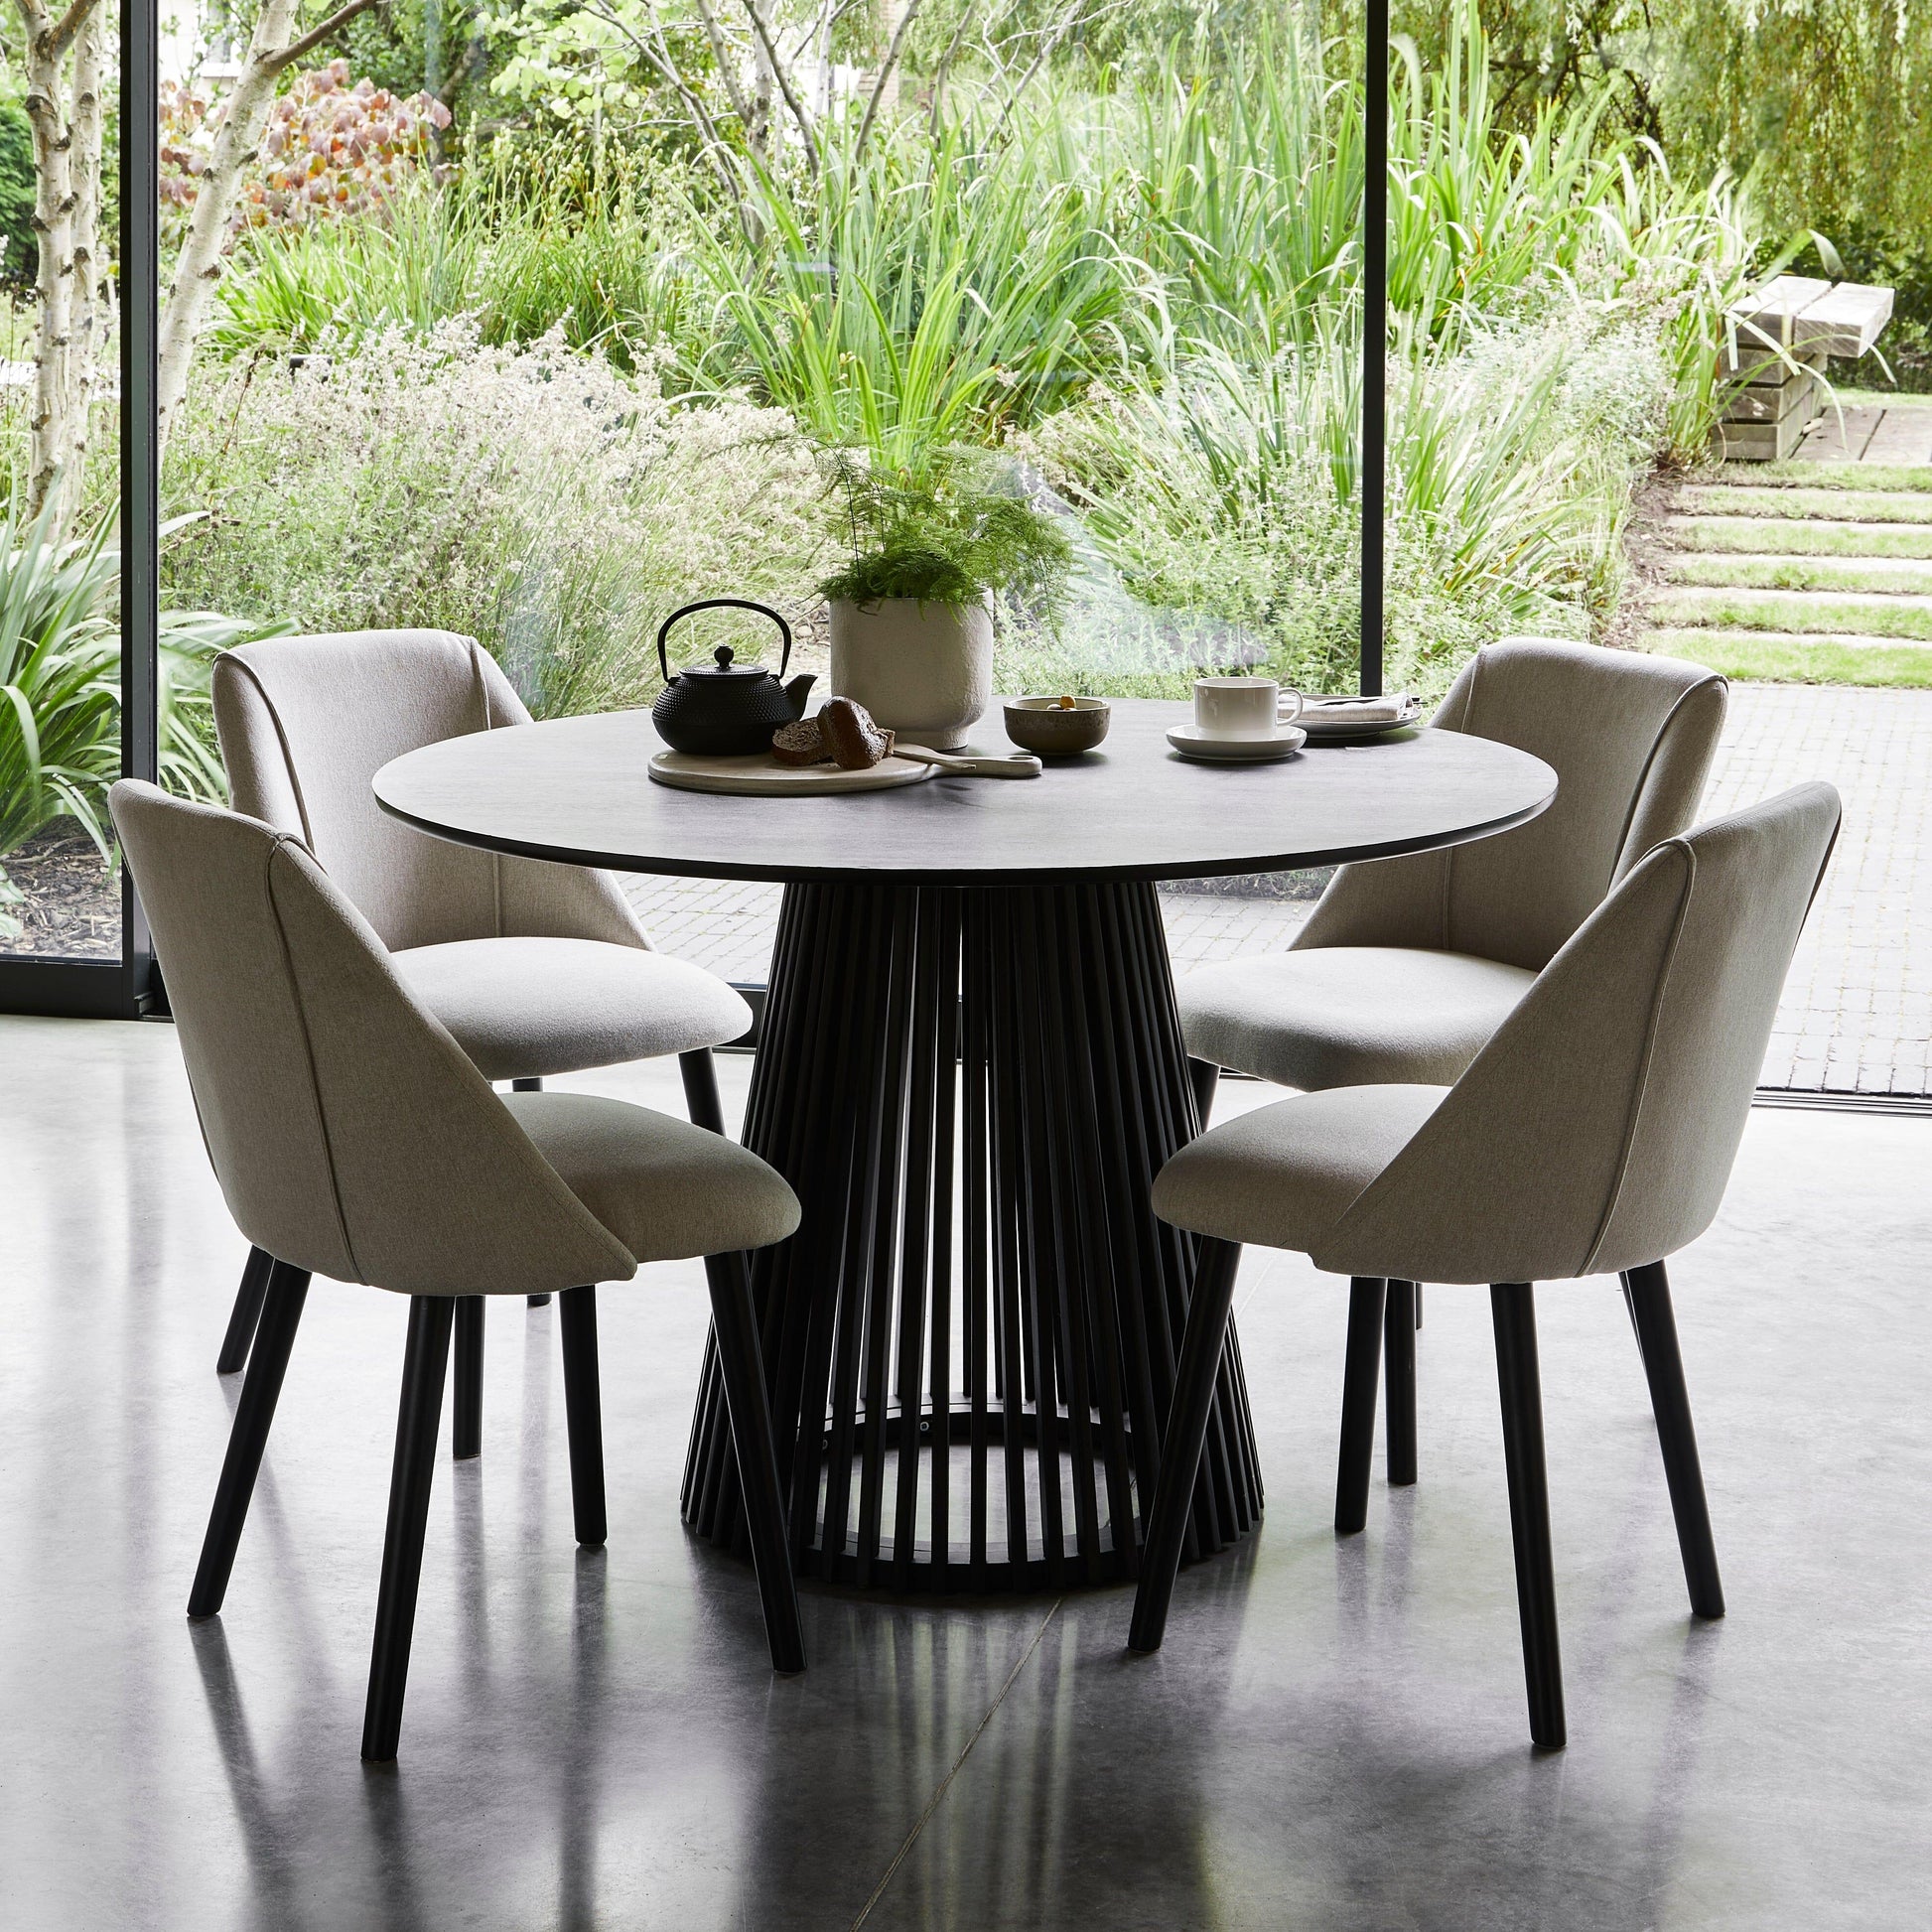 Freya Dining Chairs and Willow Dining Table Laura James 